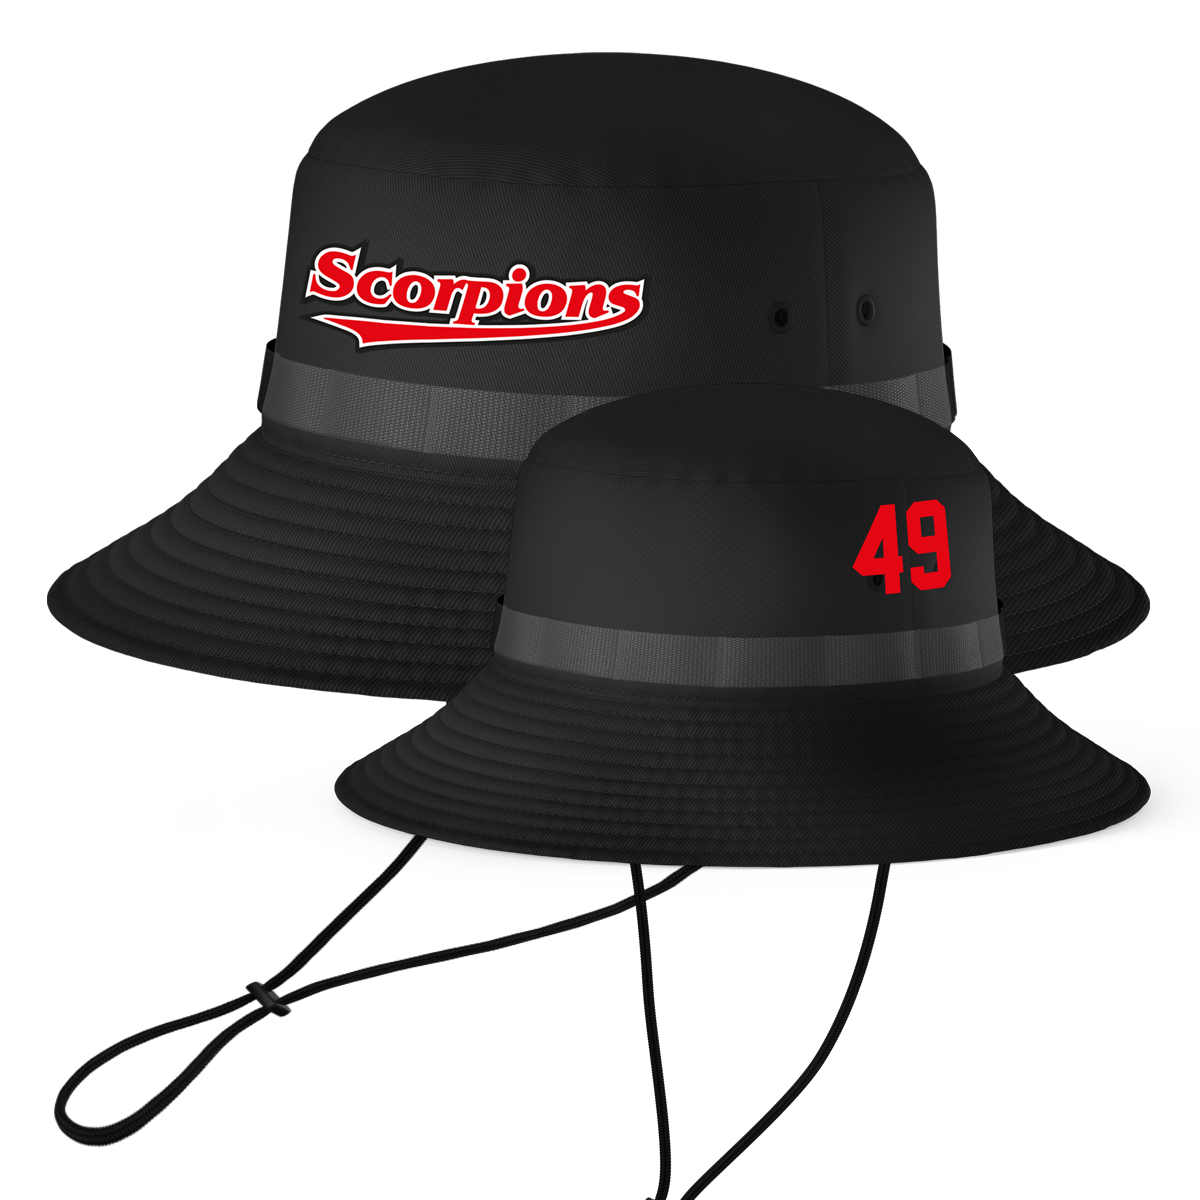 Scorpions Bucket Hat with Playernumber/Initials